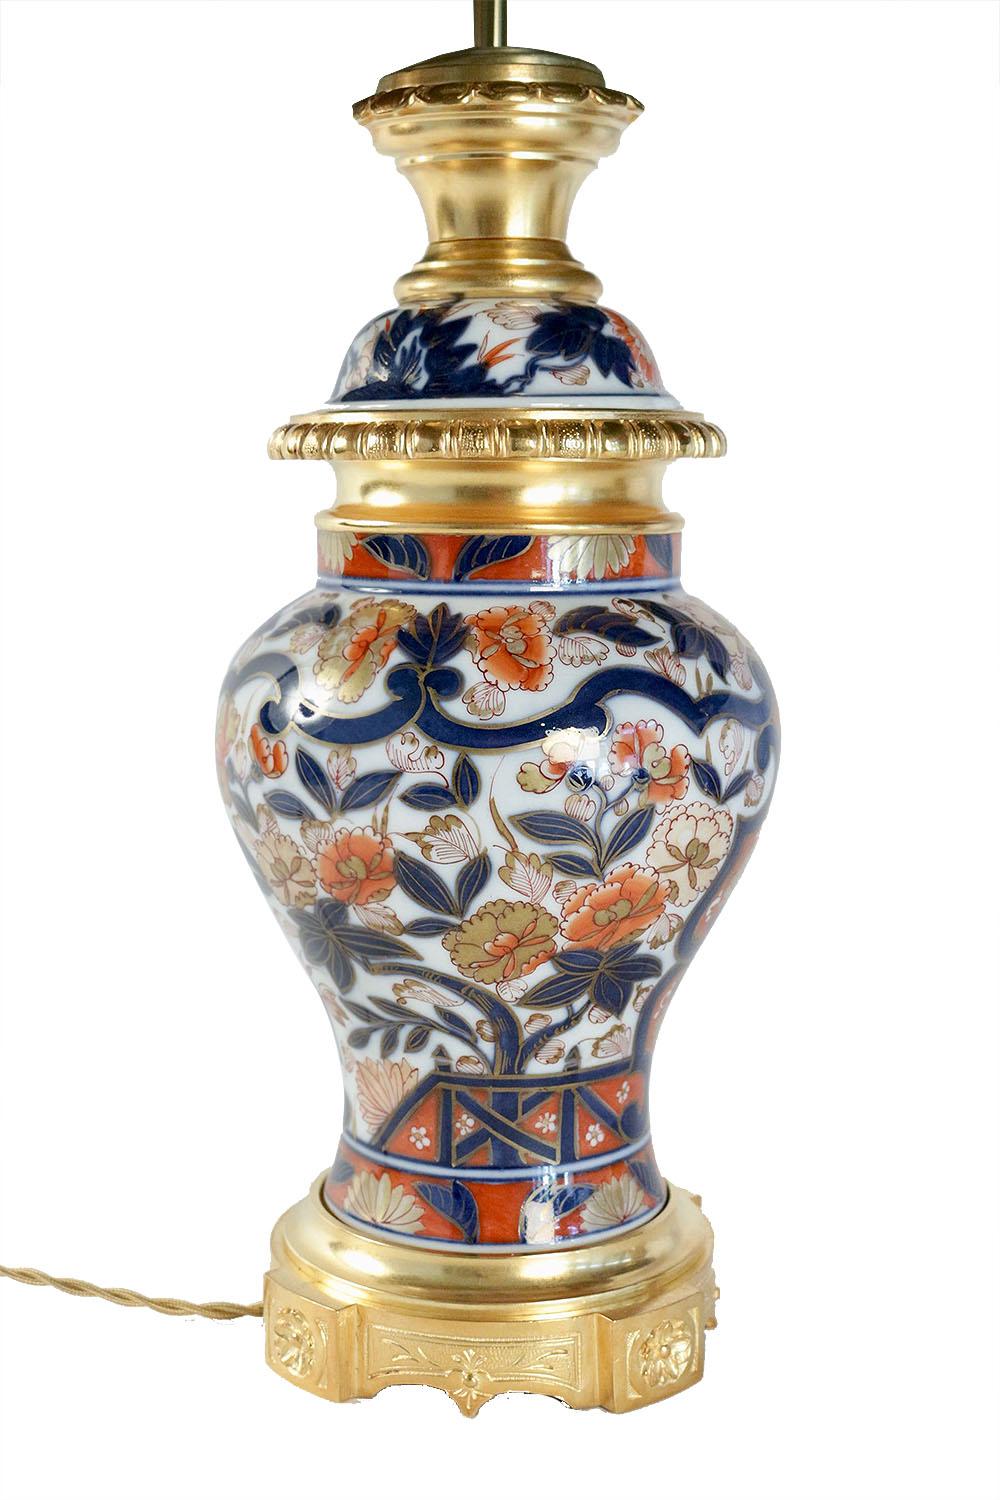 French Pair of Bayeux Porcelain Lamps, Imari Decor, 19th Century